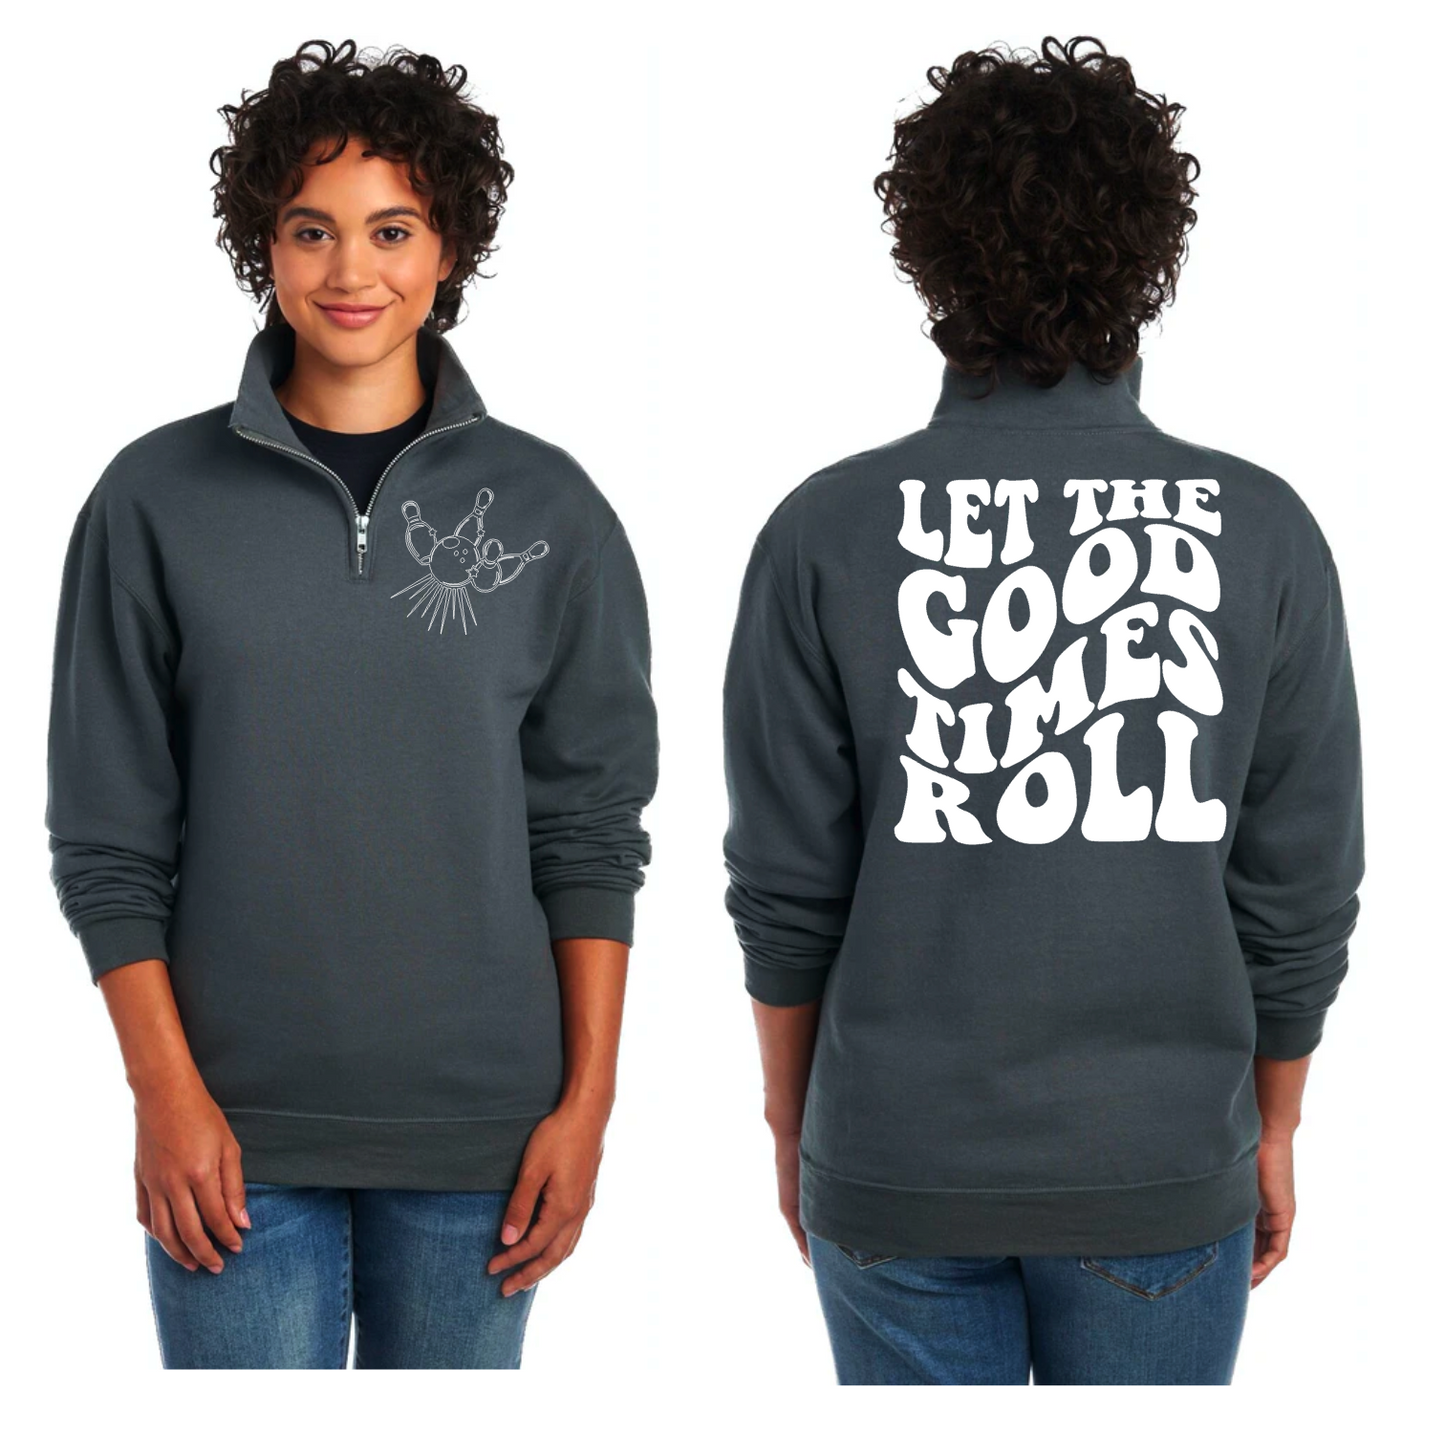 let the good times roll quarter zip